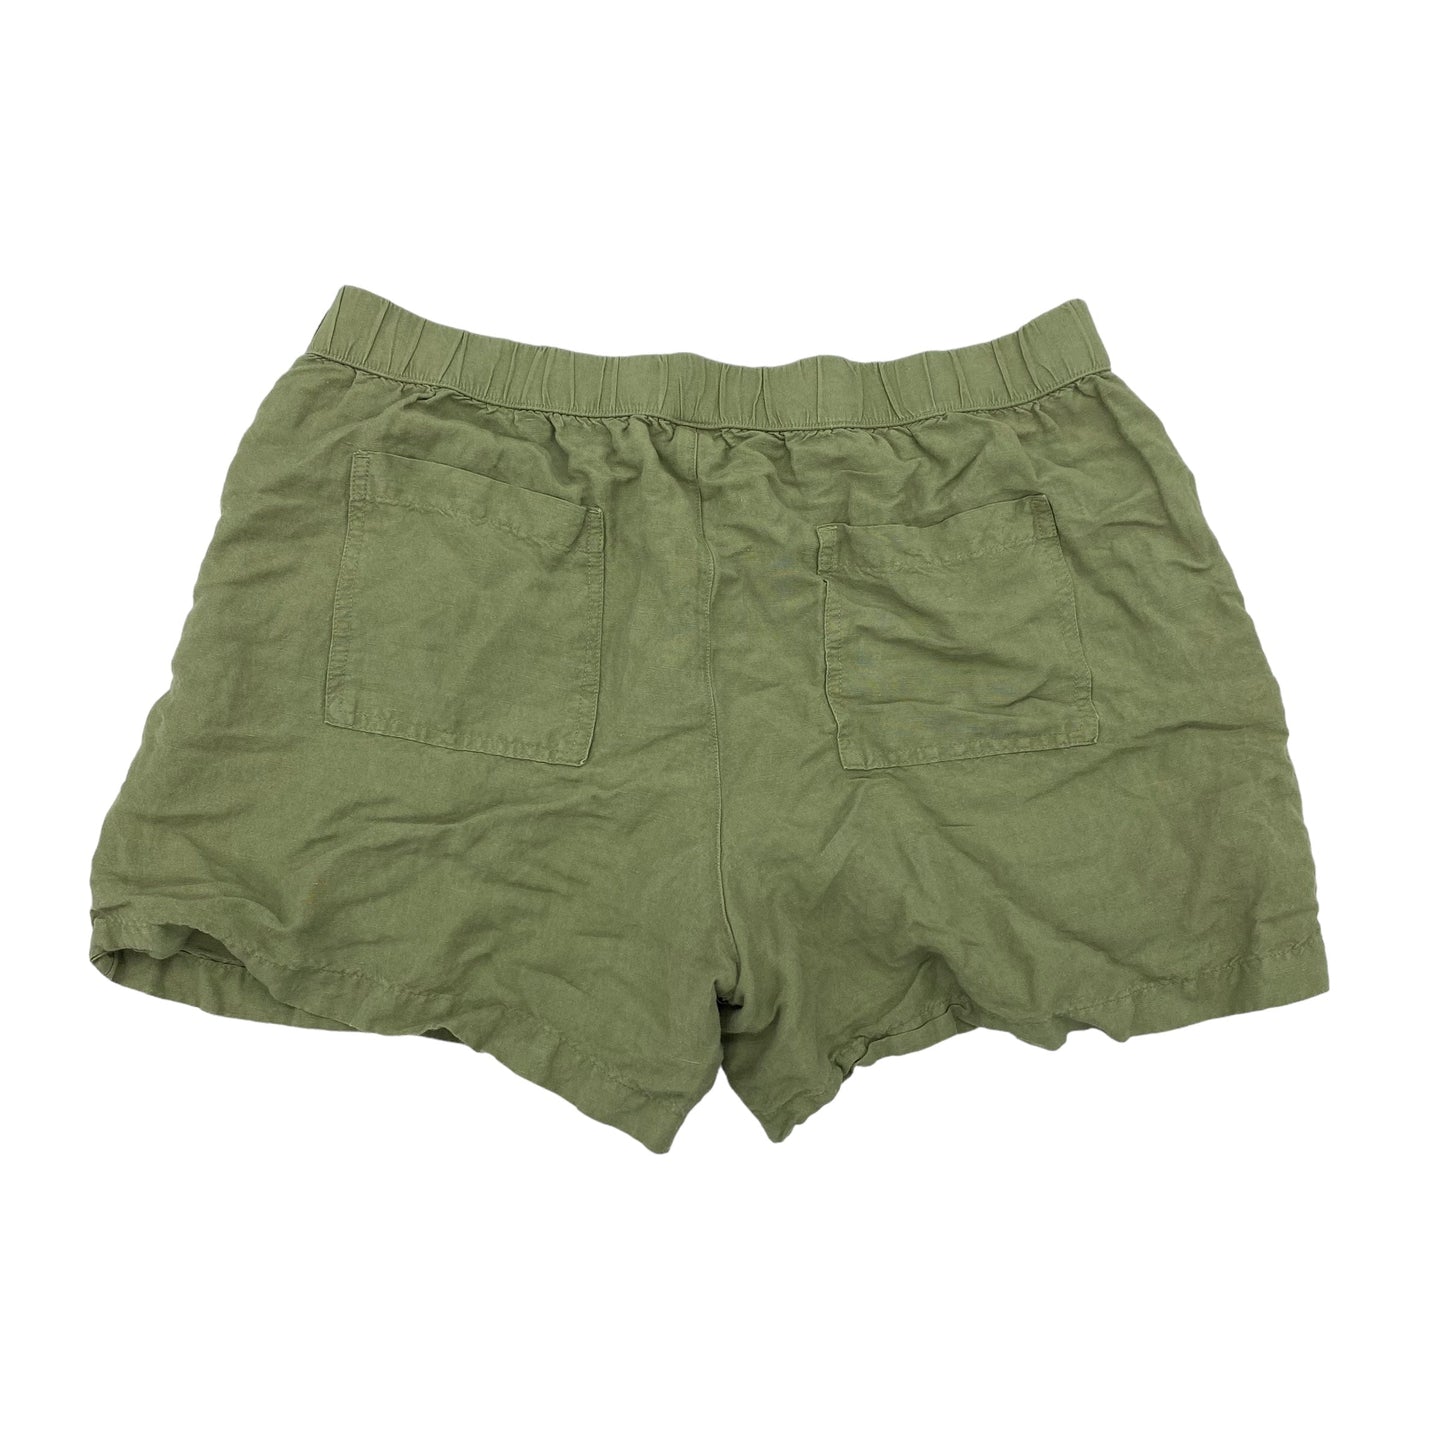 GREEN A NEW DAY SHORTS, Size XL